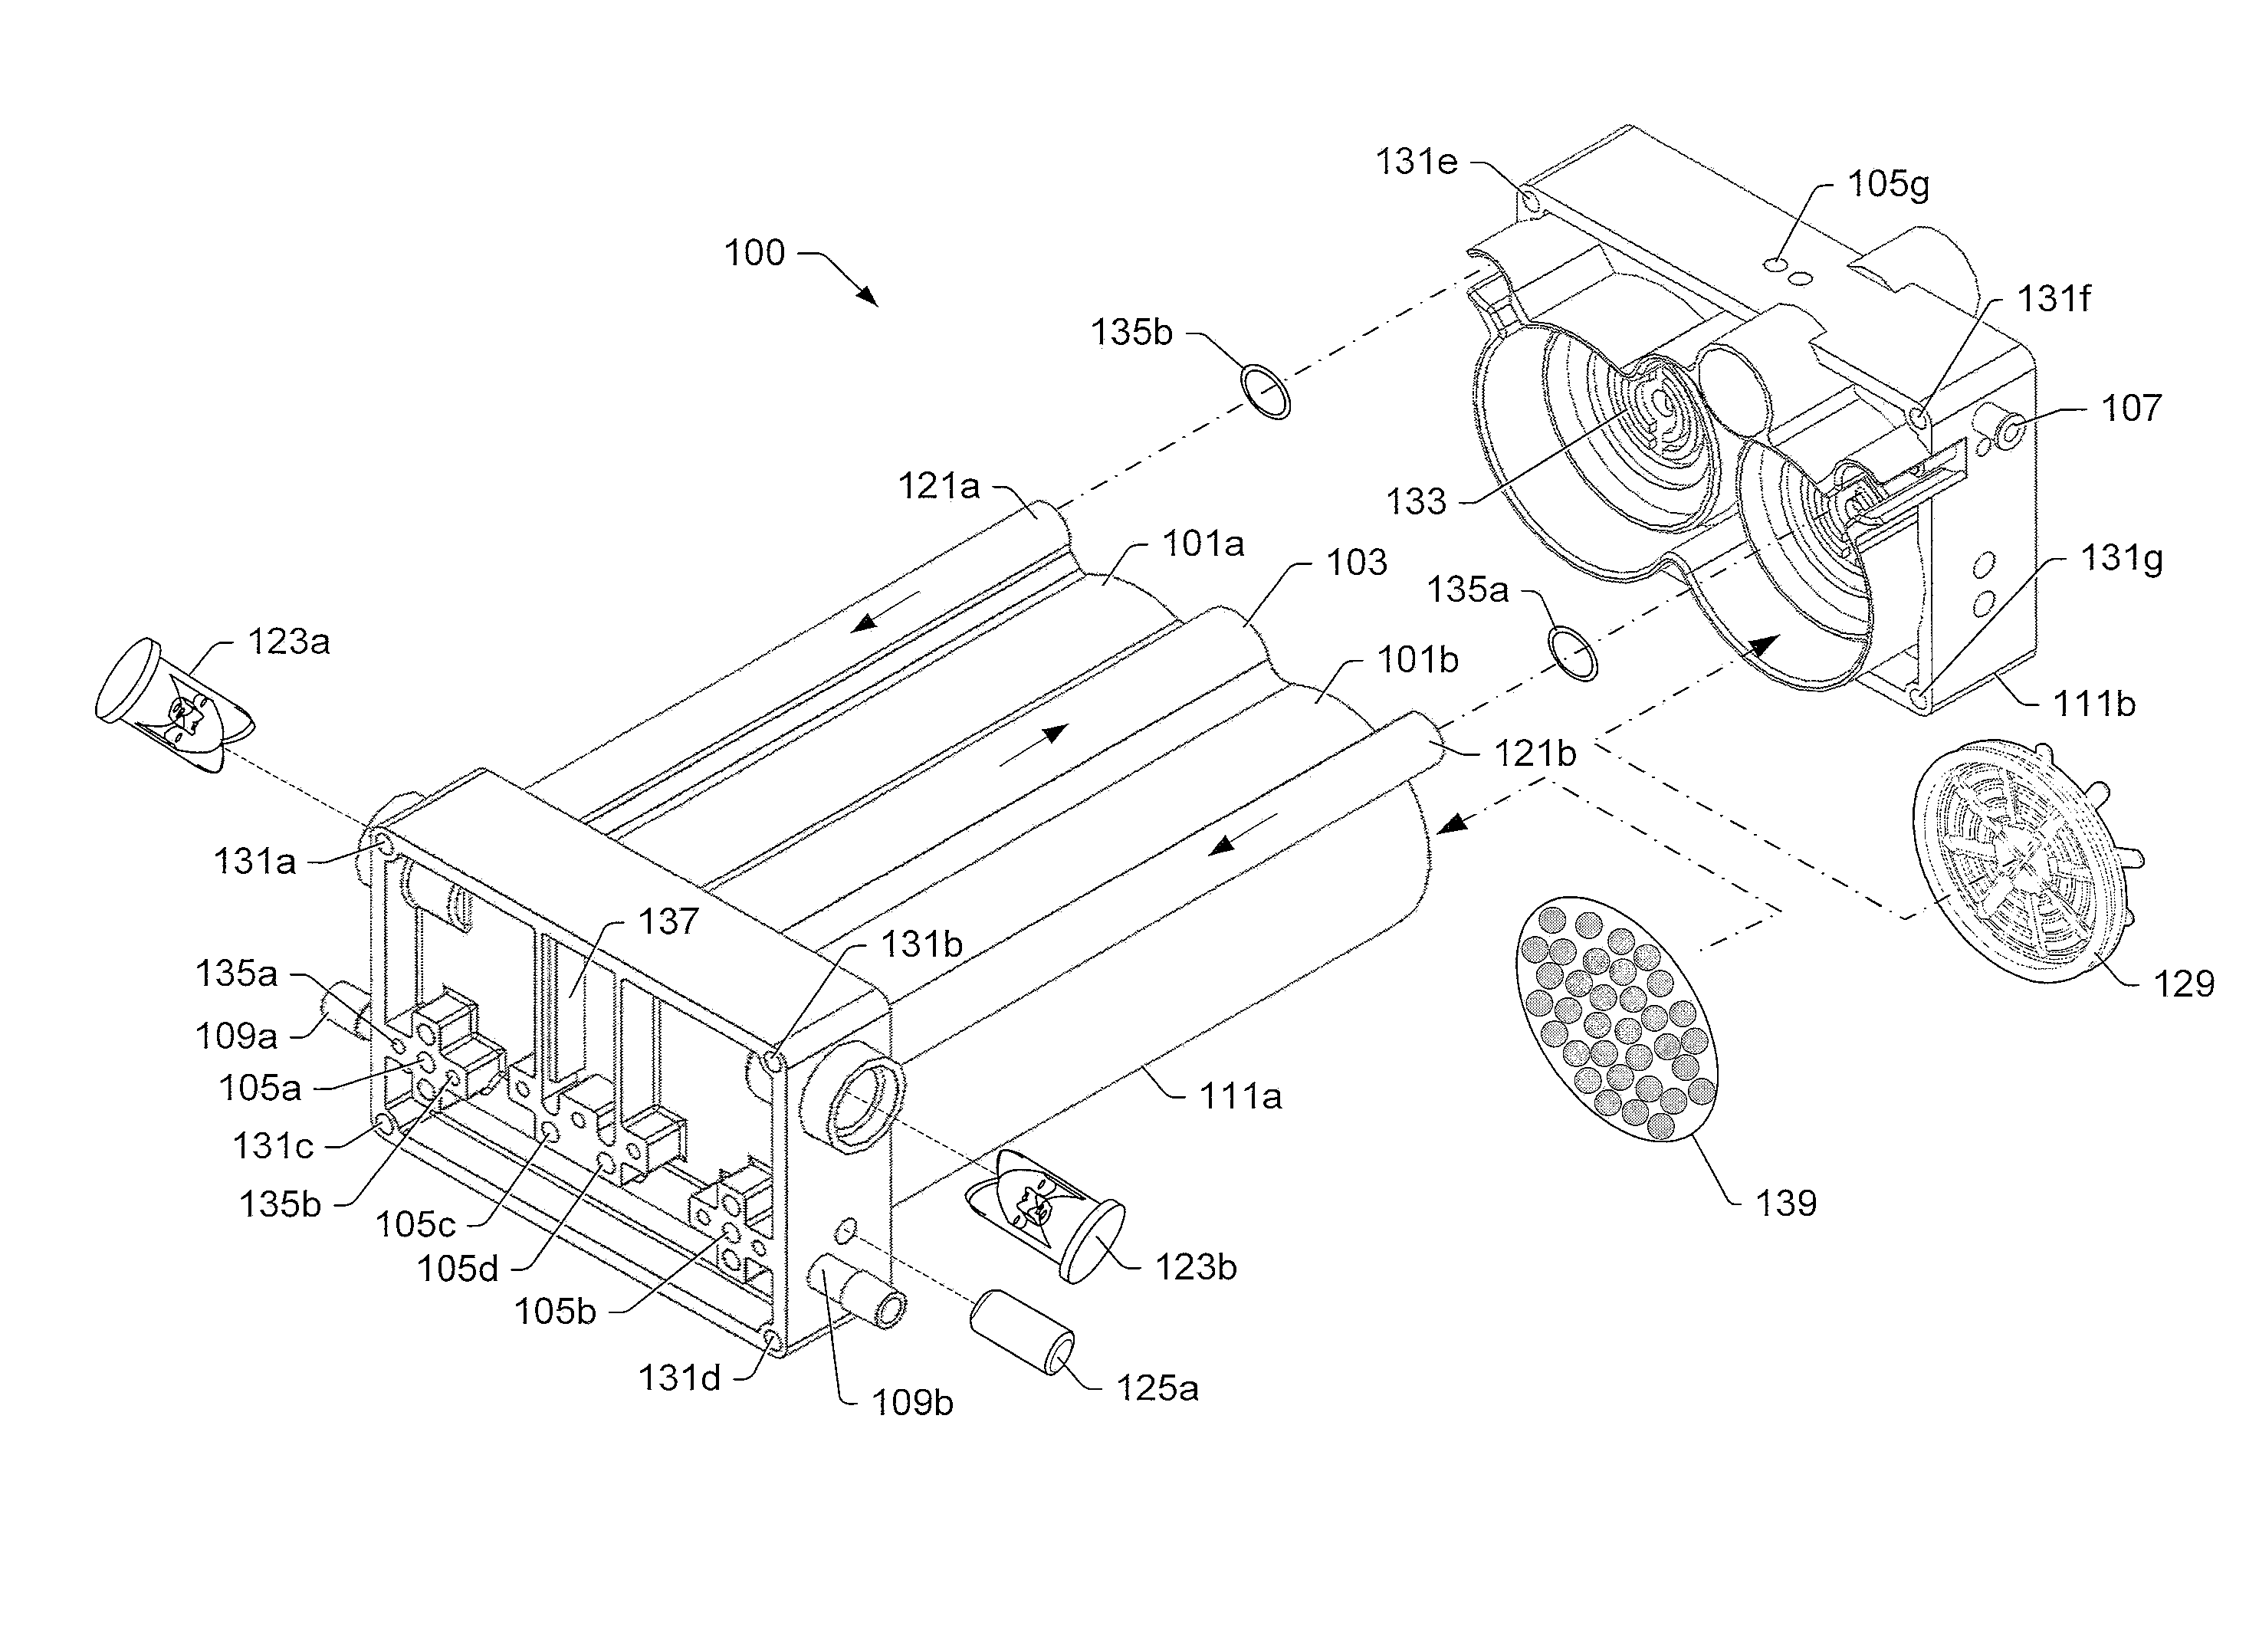 Oxygen concentrator apparatus and method having an ultrasonic detector